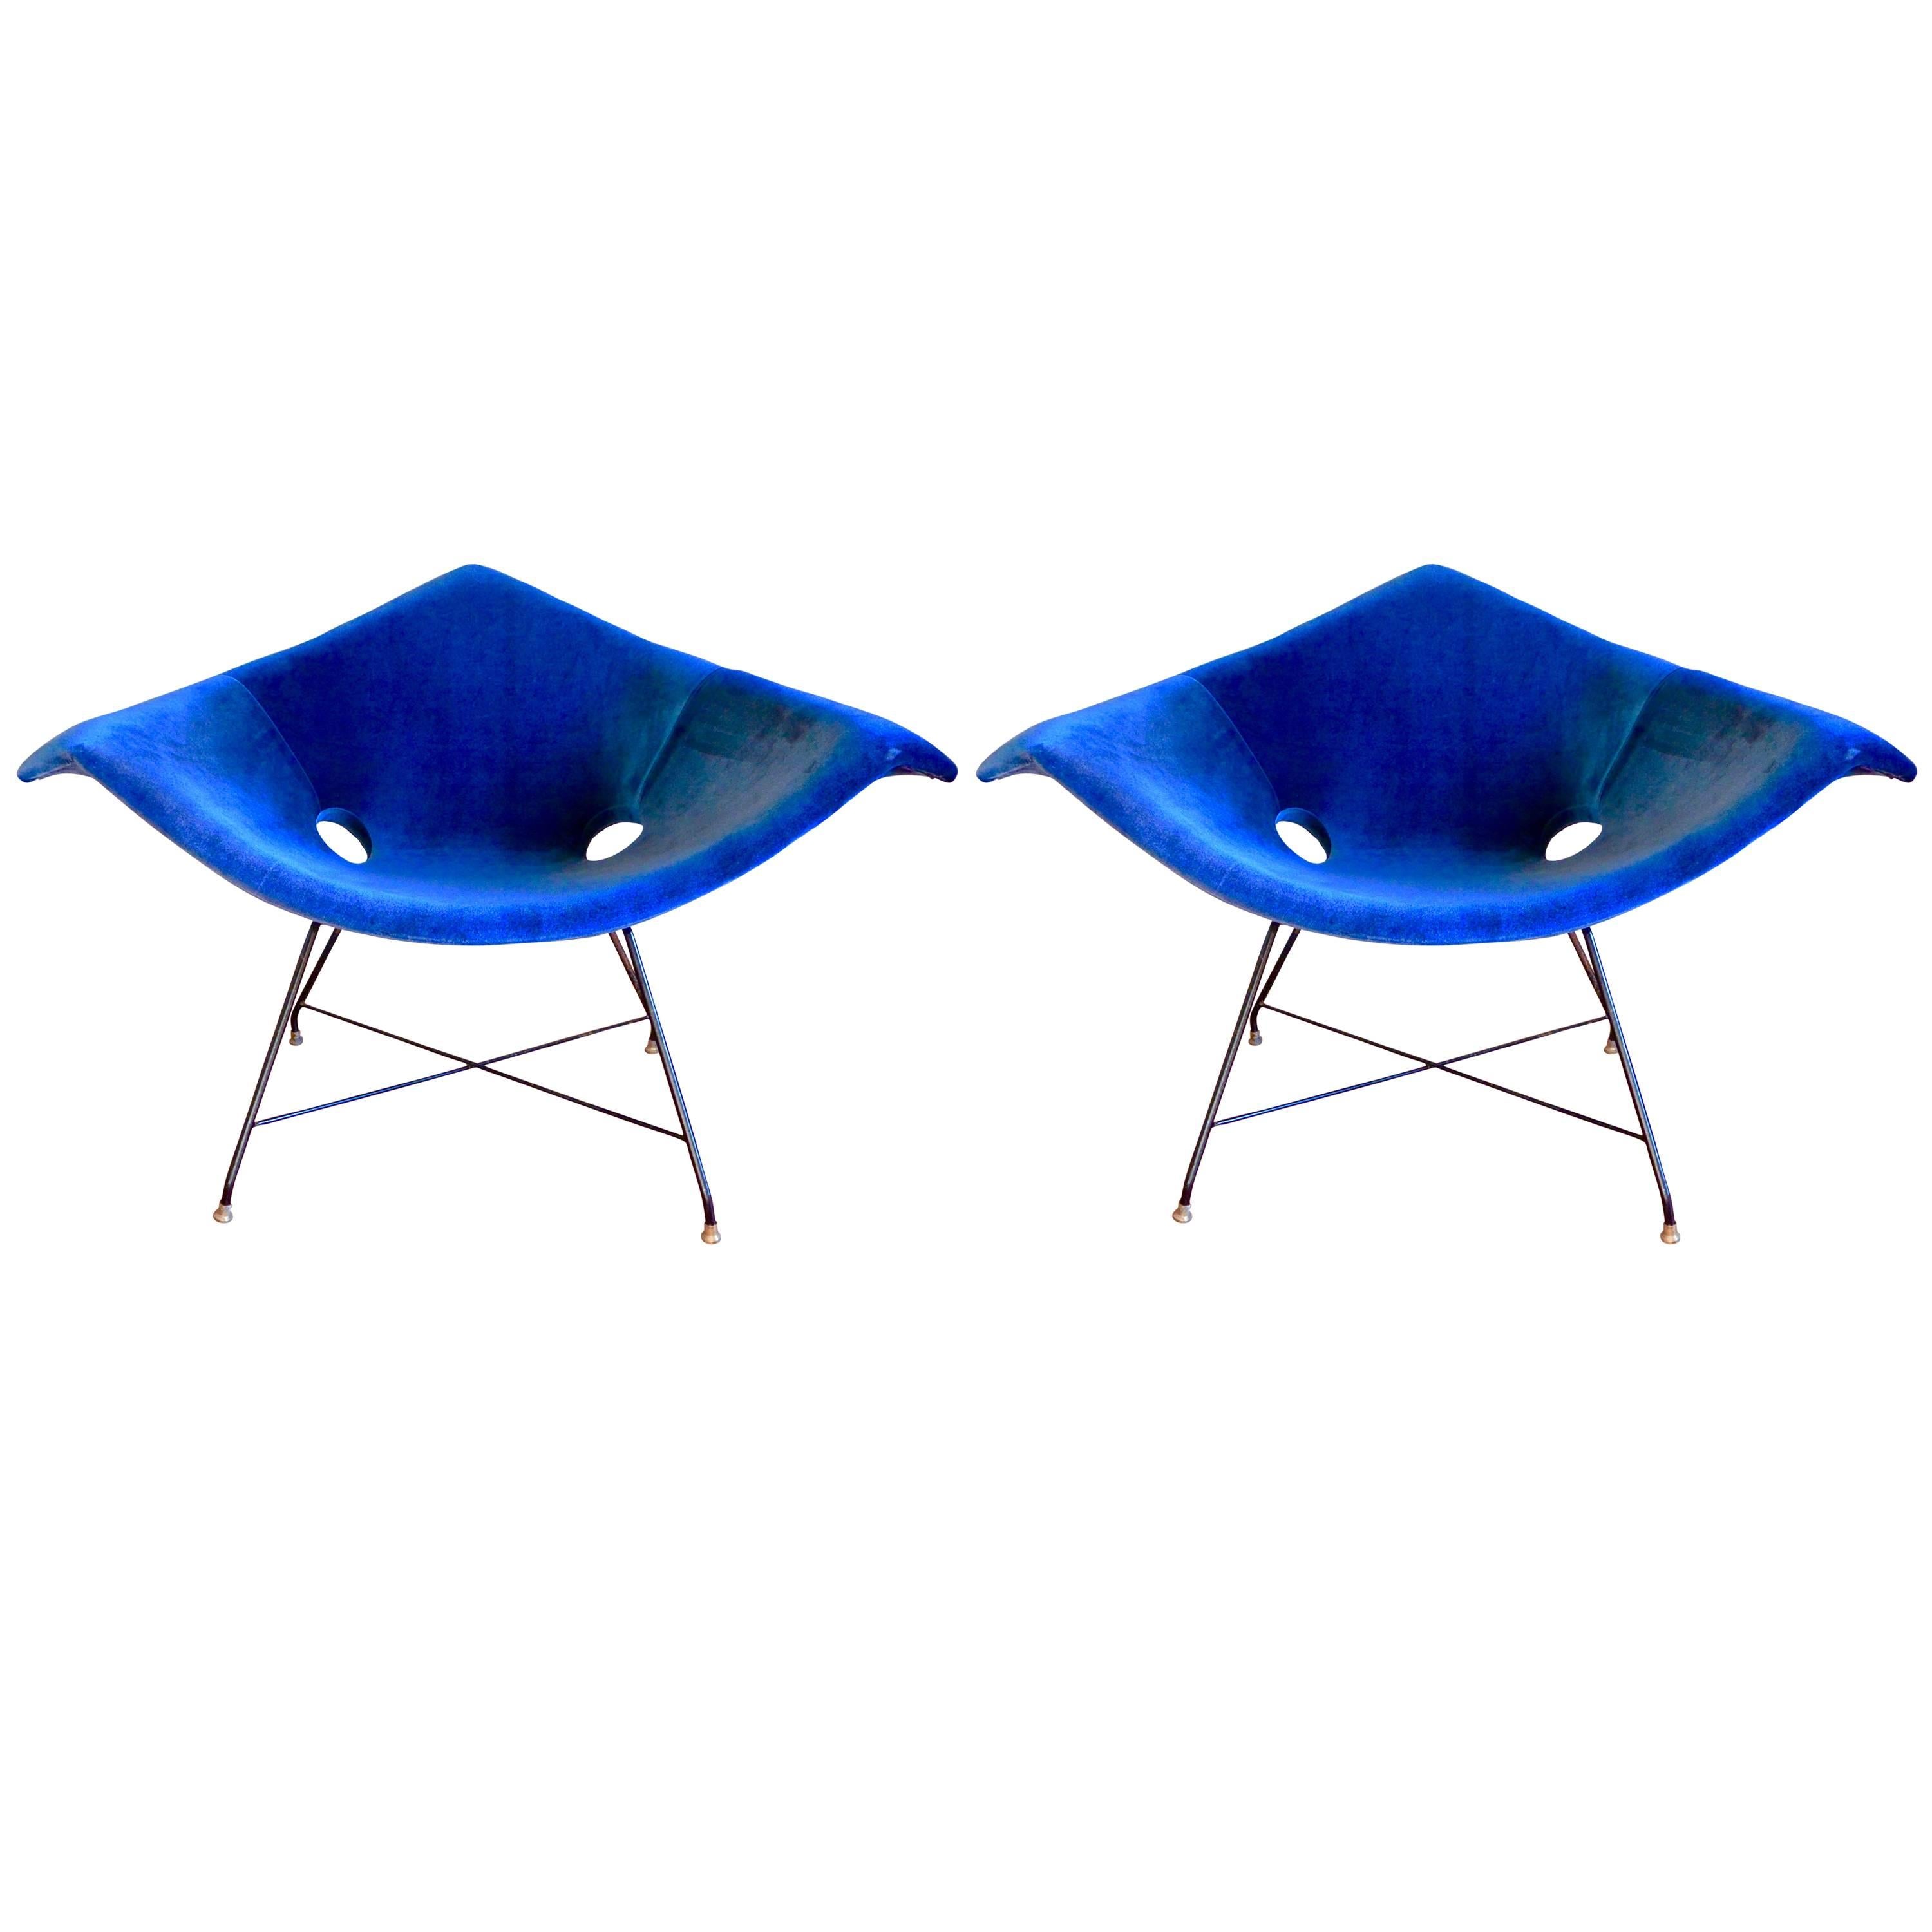 Rare Pair of Lounge Chairs by Augusto Bozzi, Italy, circa 1958 For Sale